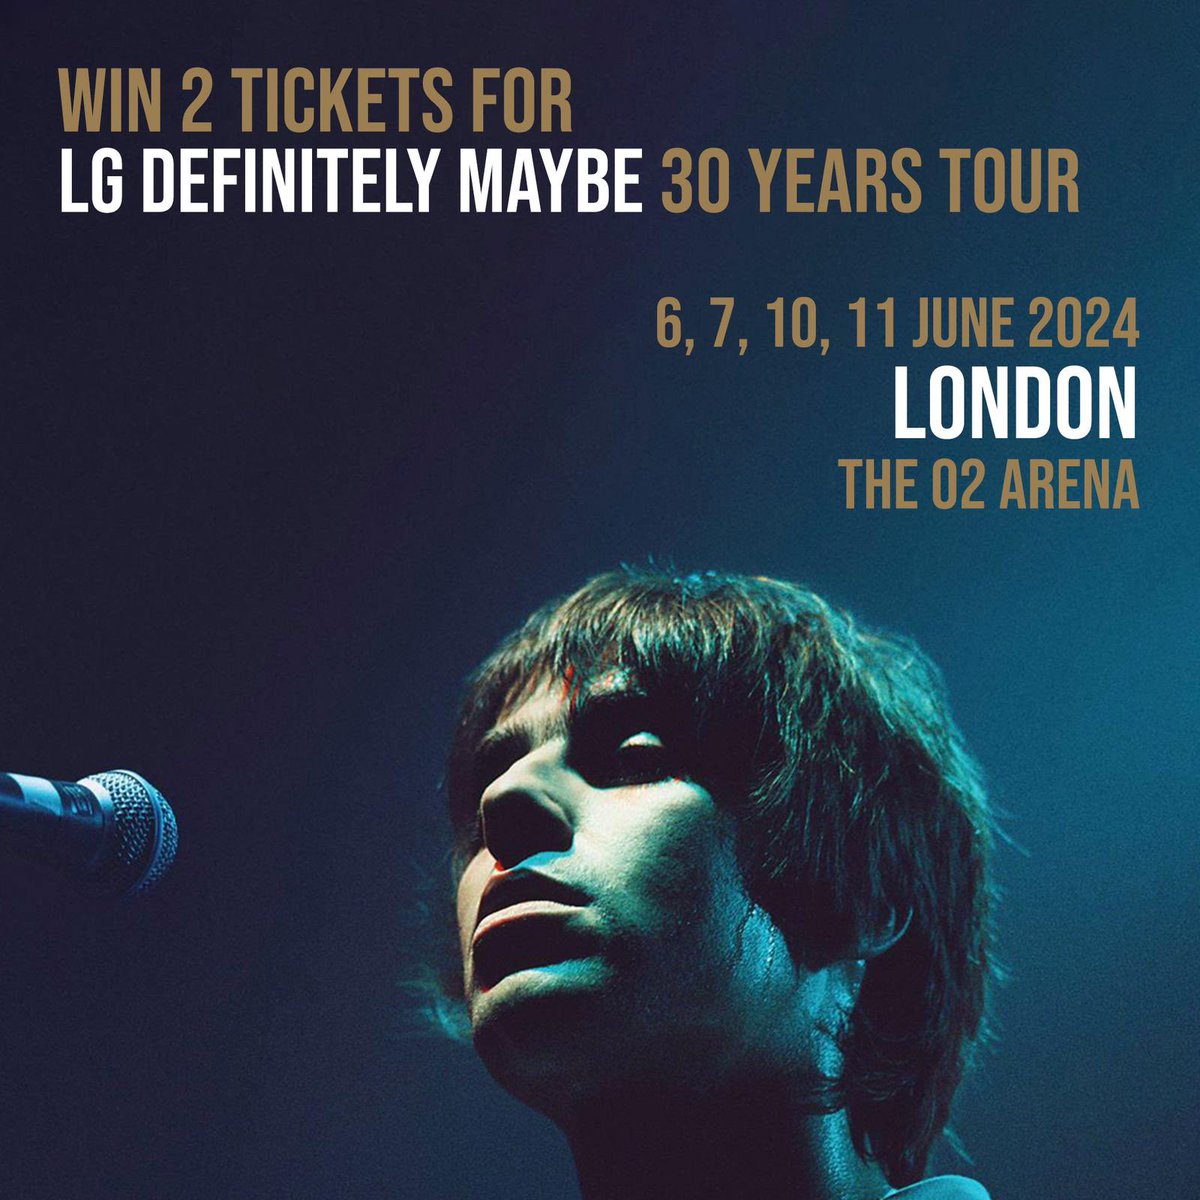 Win 2 tickets for Liam Gallagher Definitely Maybe Tour in London 🎫 To enter: - Like this post and RT - Follow us and @liamgfansclub - Tag 2 friends Good luck 🤞🏻